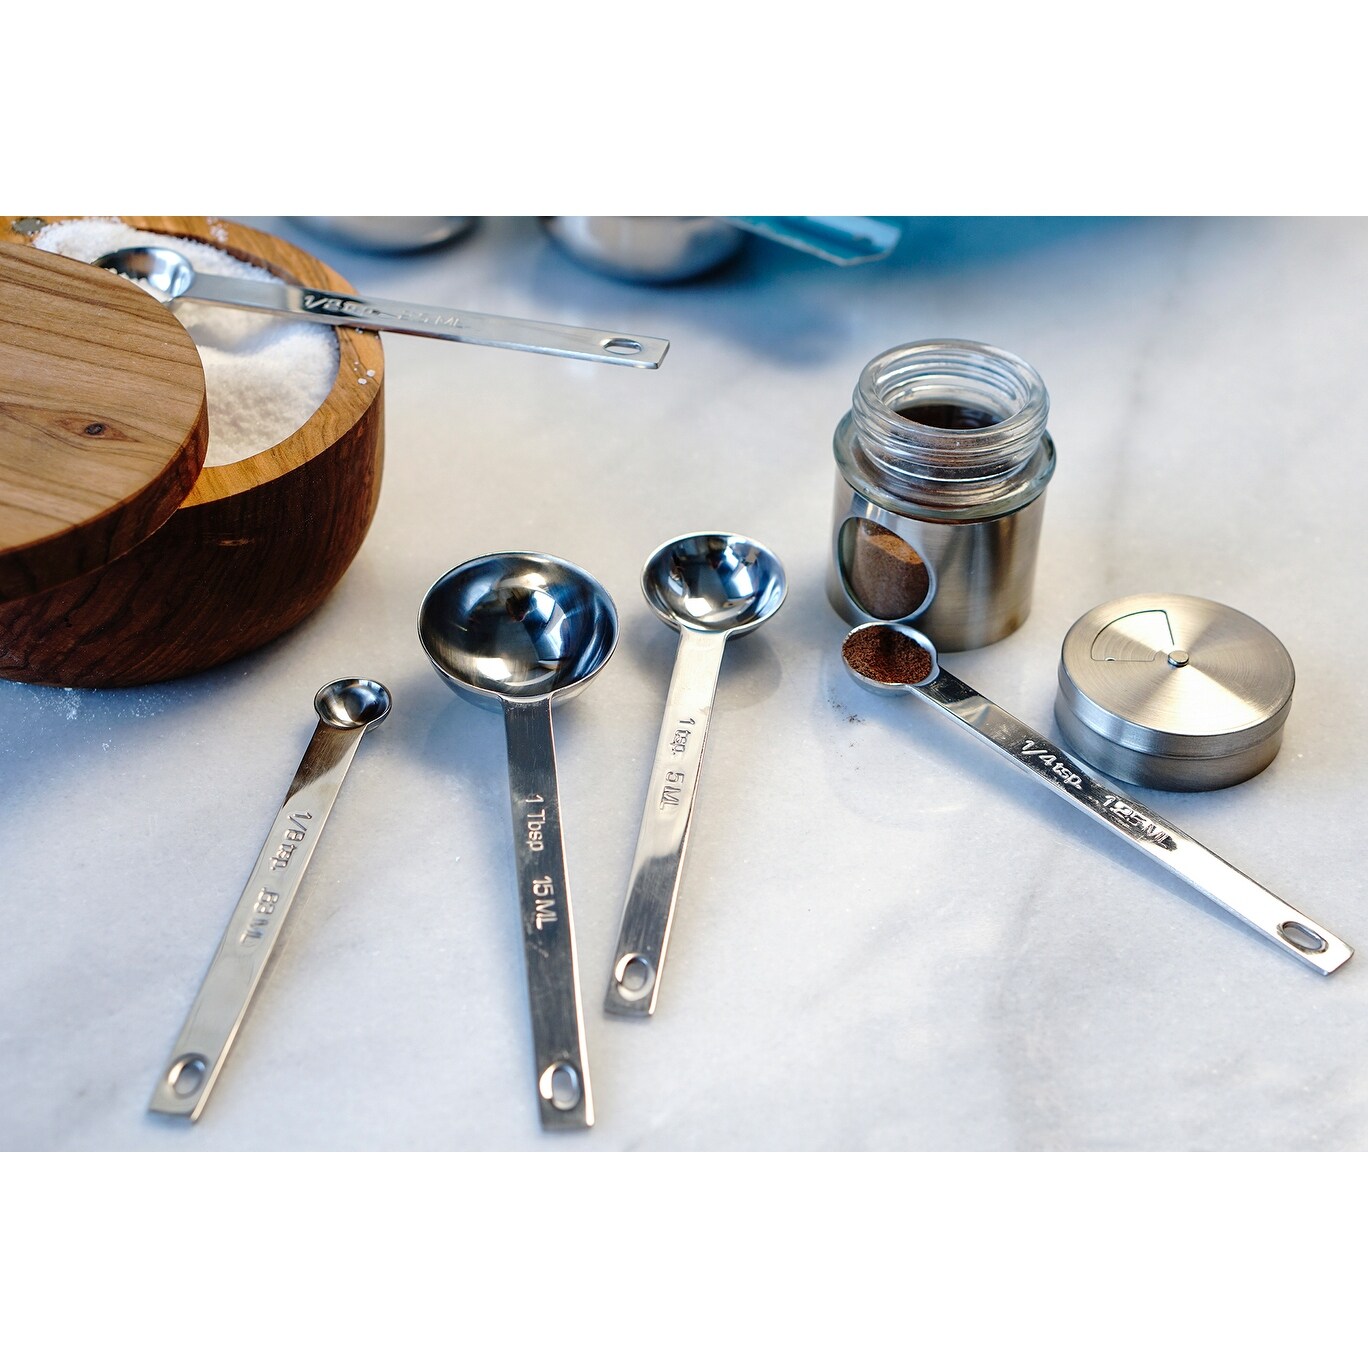 https://ak1.ostkcdn.com/images/products/is/images/direct/4b50123cc625eb45bd8ad87a0d64df5dbe665464/Measuring-Spoon-%28Set-of-5%29.jpg